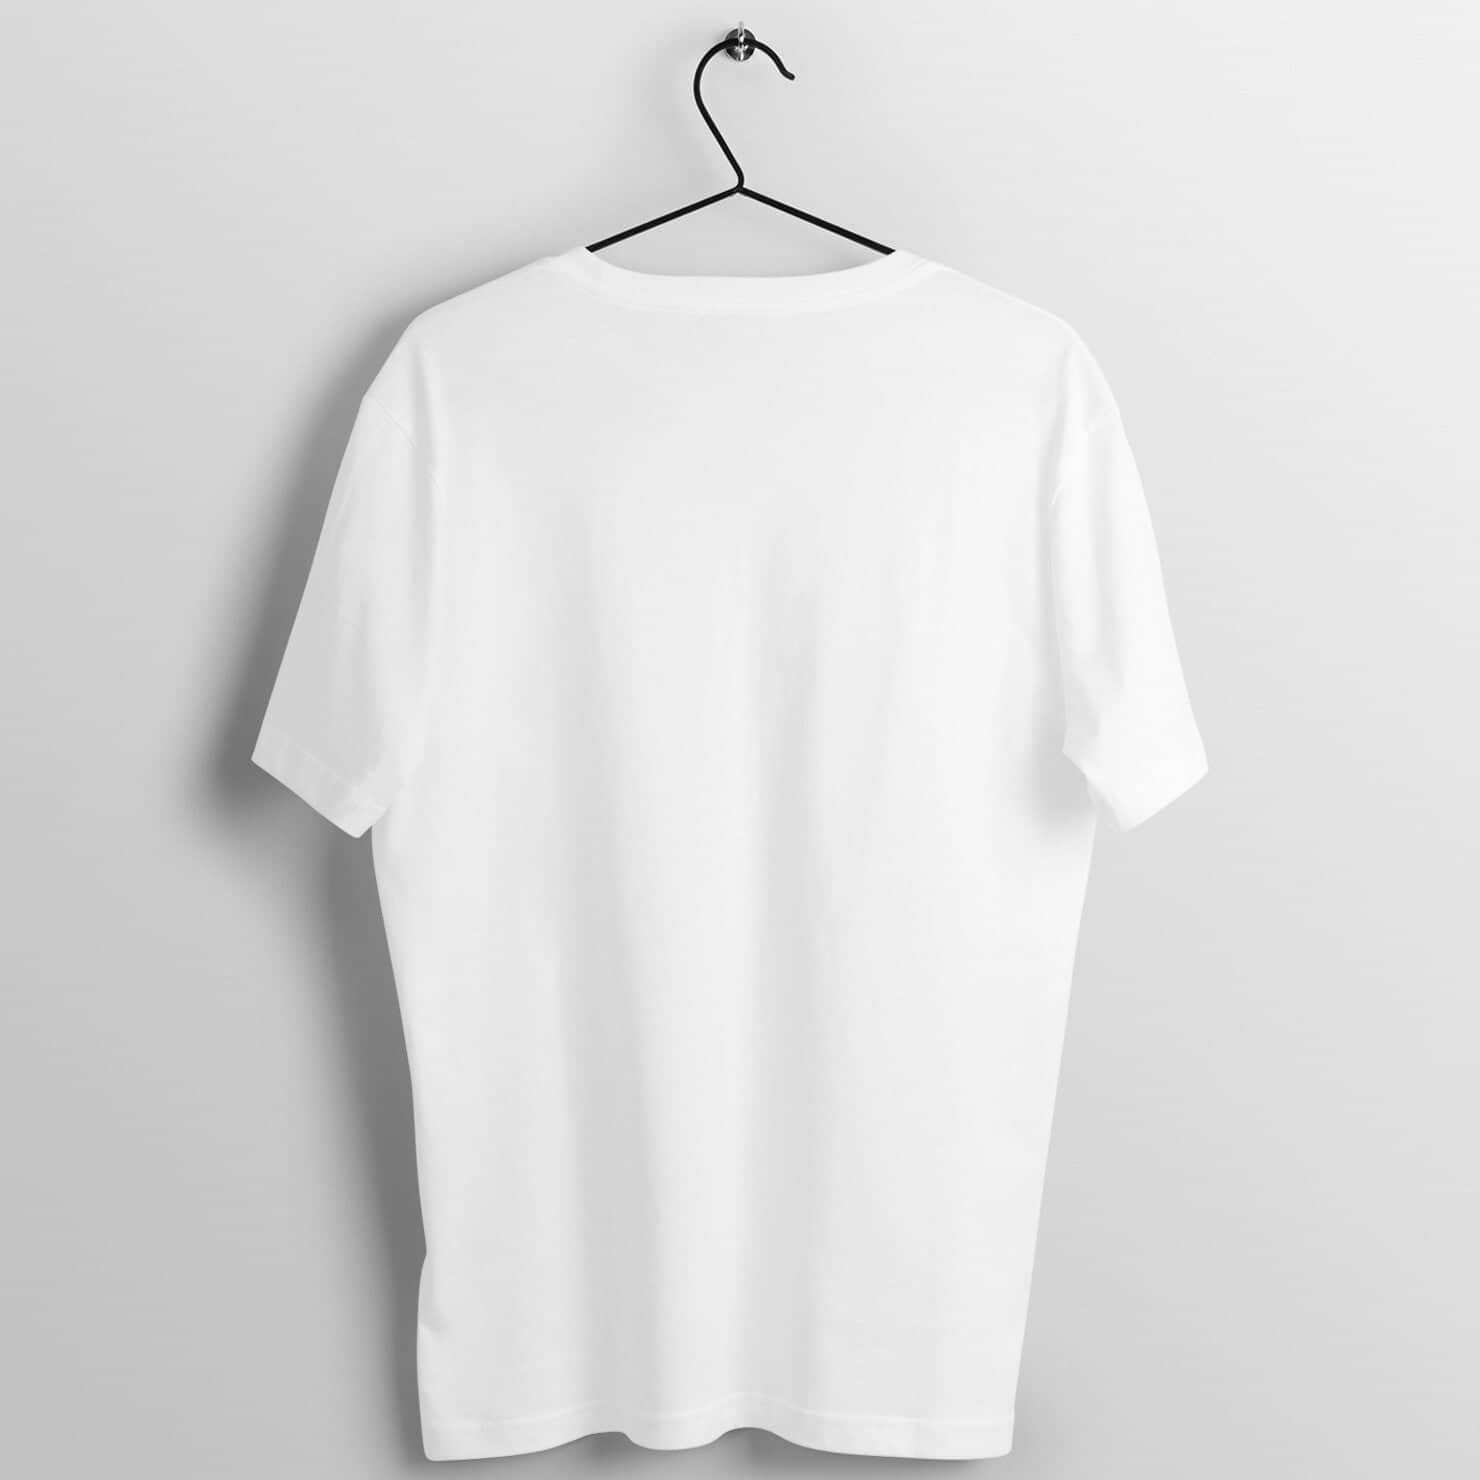 Anonymous Mask Exclusive White T Shirt for Men and Women Shirts & Tops Printrove 